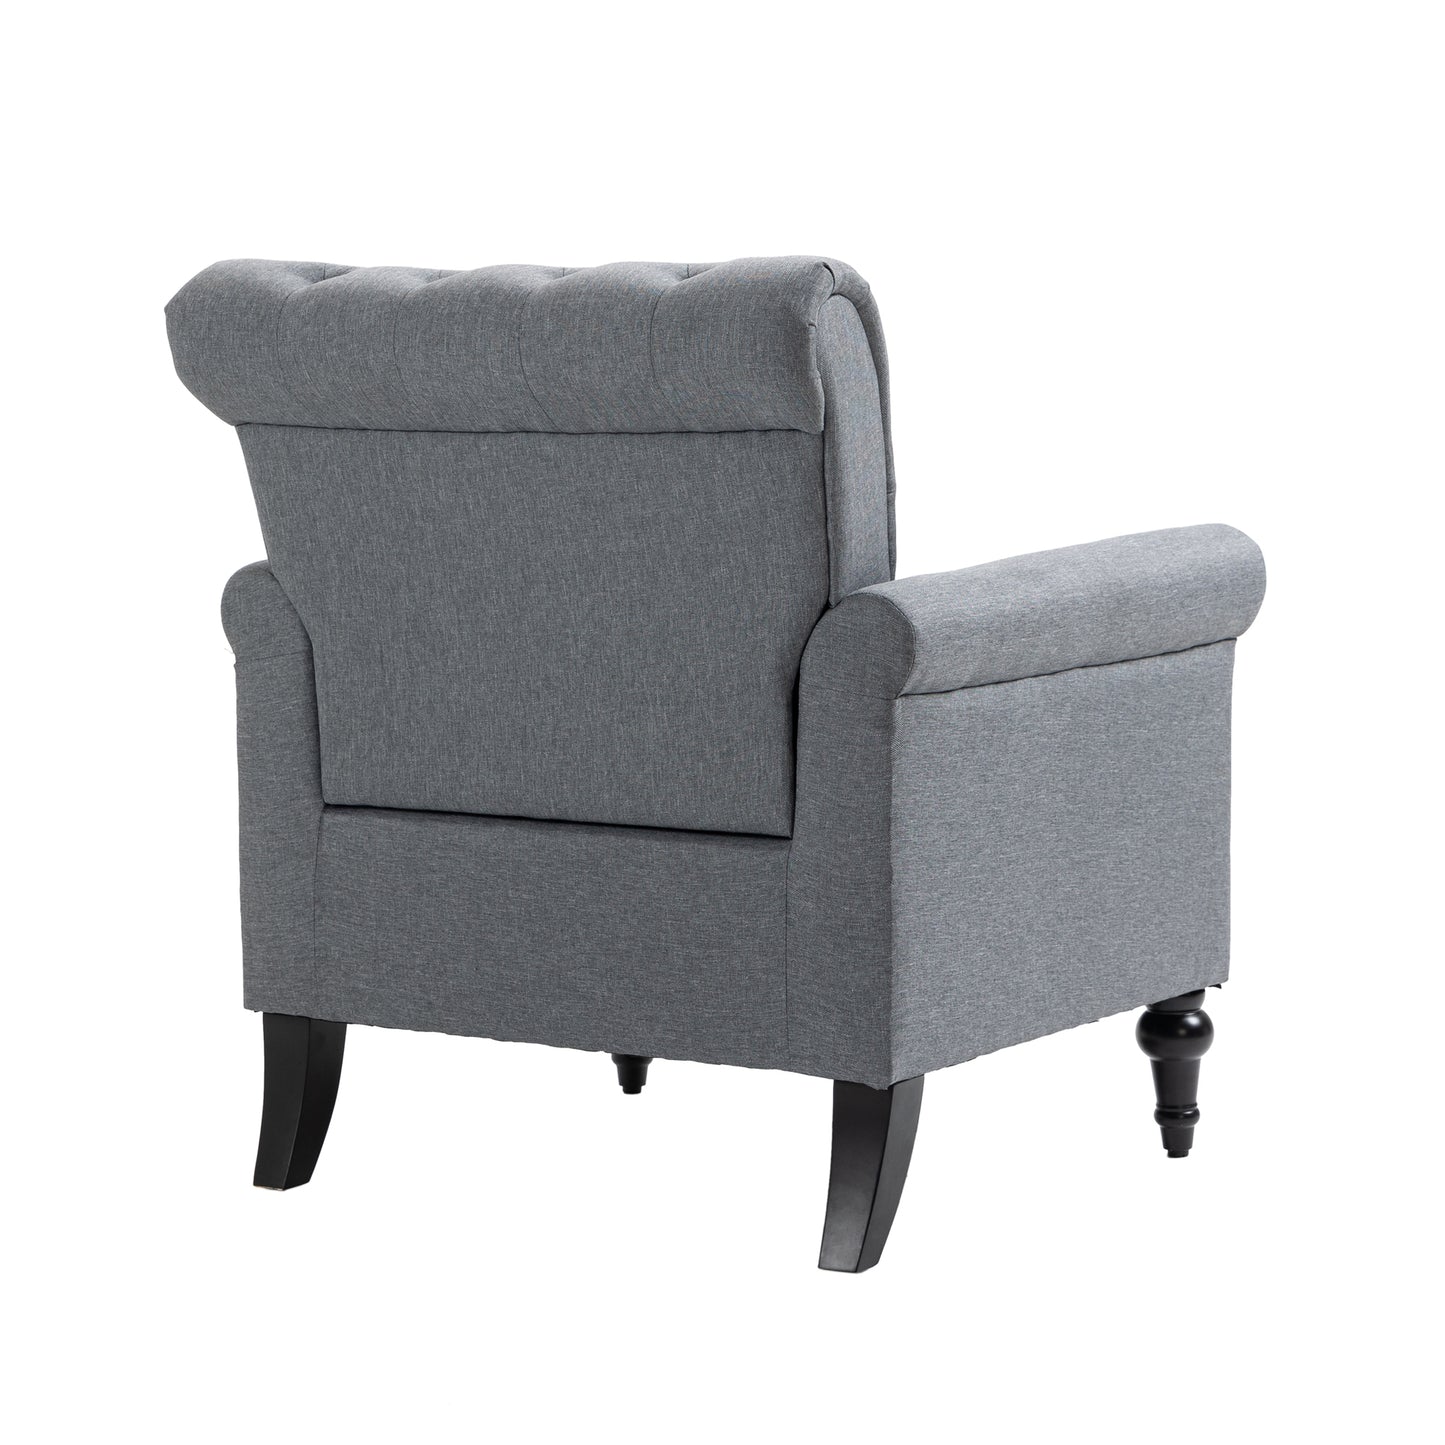 Mid-Century Modern Accent Chair, Linen Armchair w/Tufted Back/Wood Legs, Upholstered Lounge Arm Chair Single Sofa for Living Room Bedroom, Gray